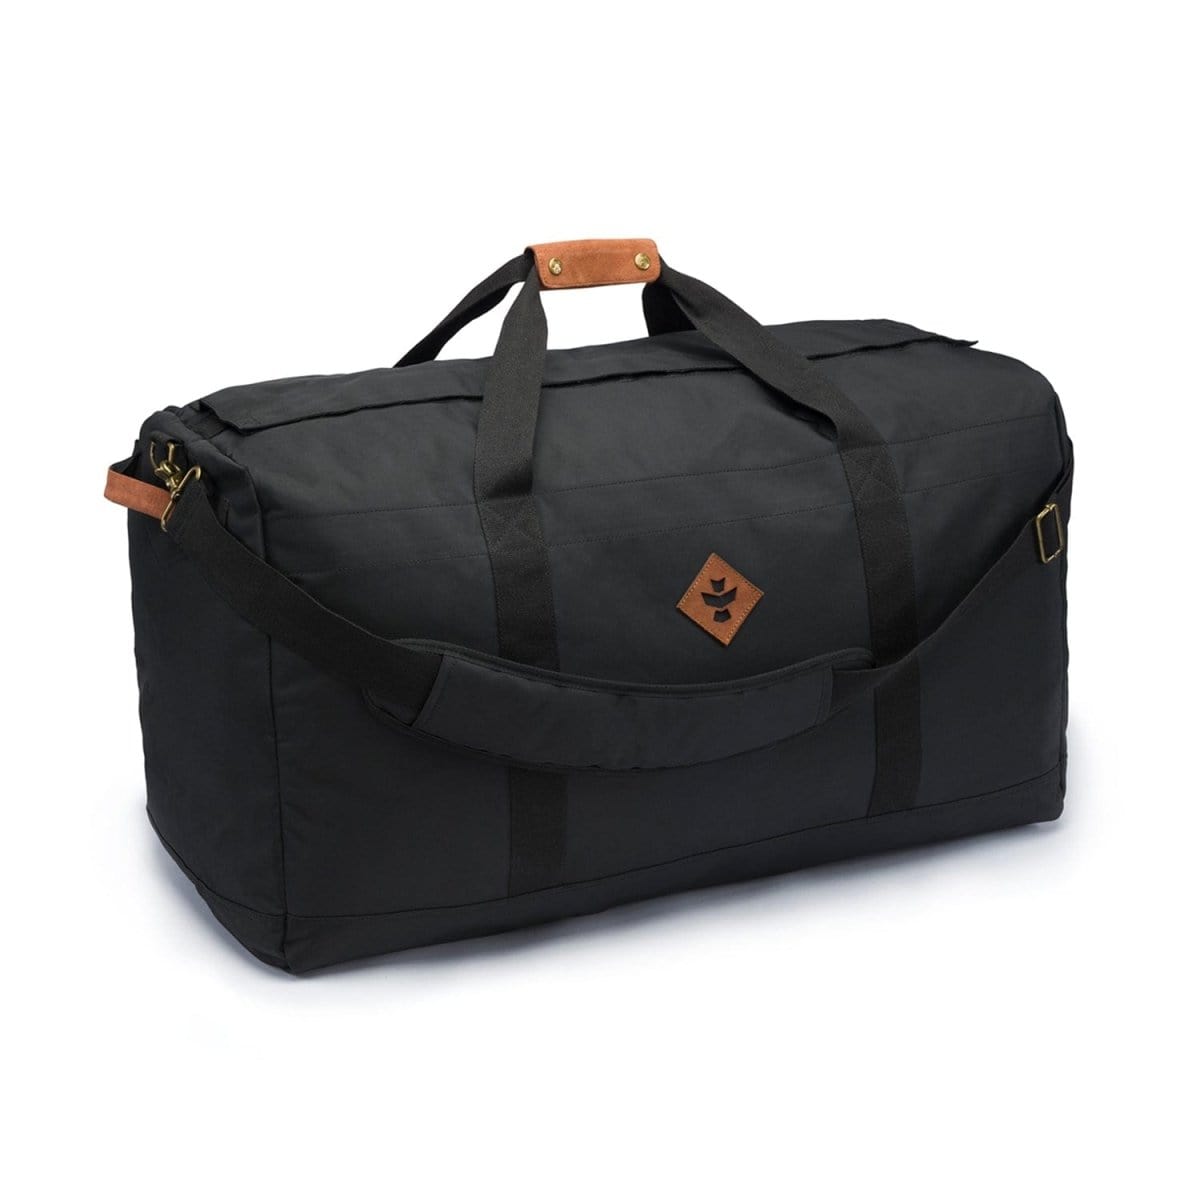 Revelry Supply Travel Bag Black The Continental - Smell Proof Large Duffle